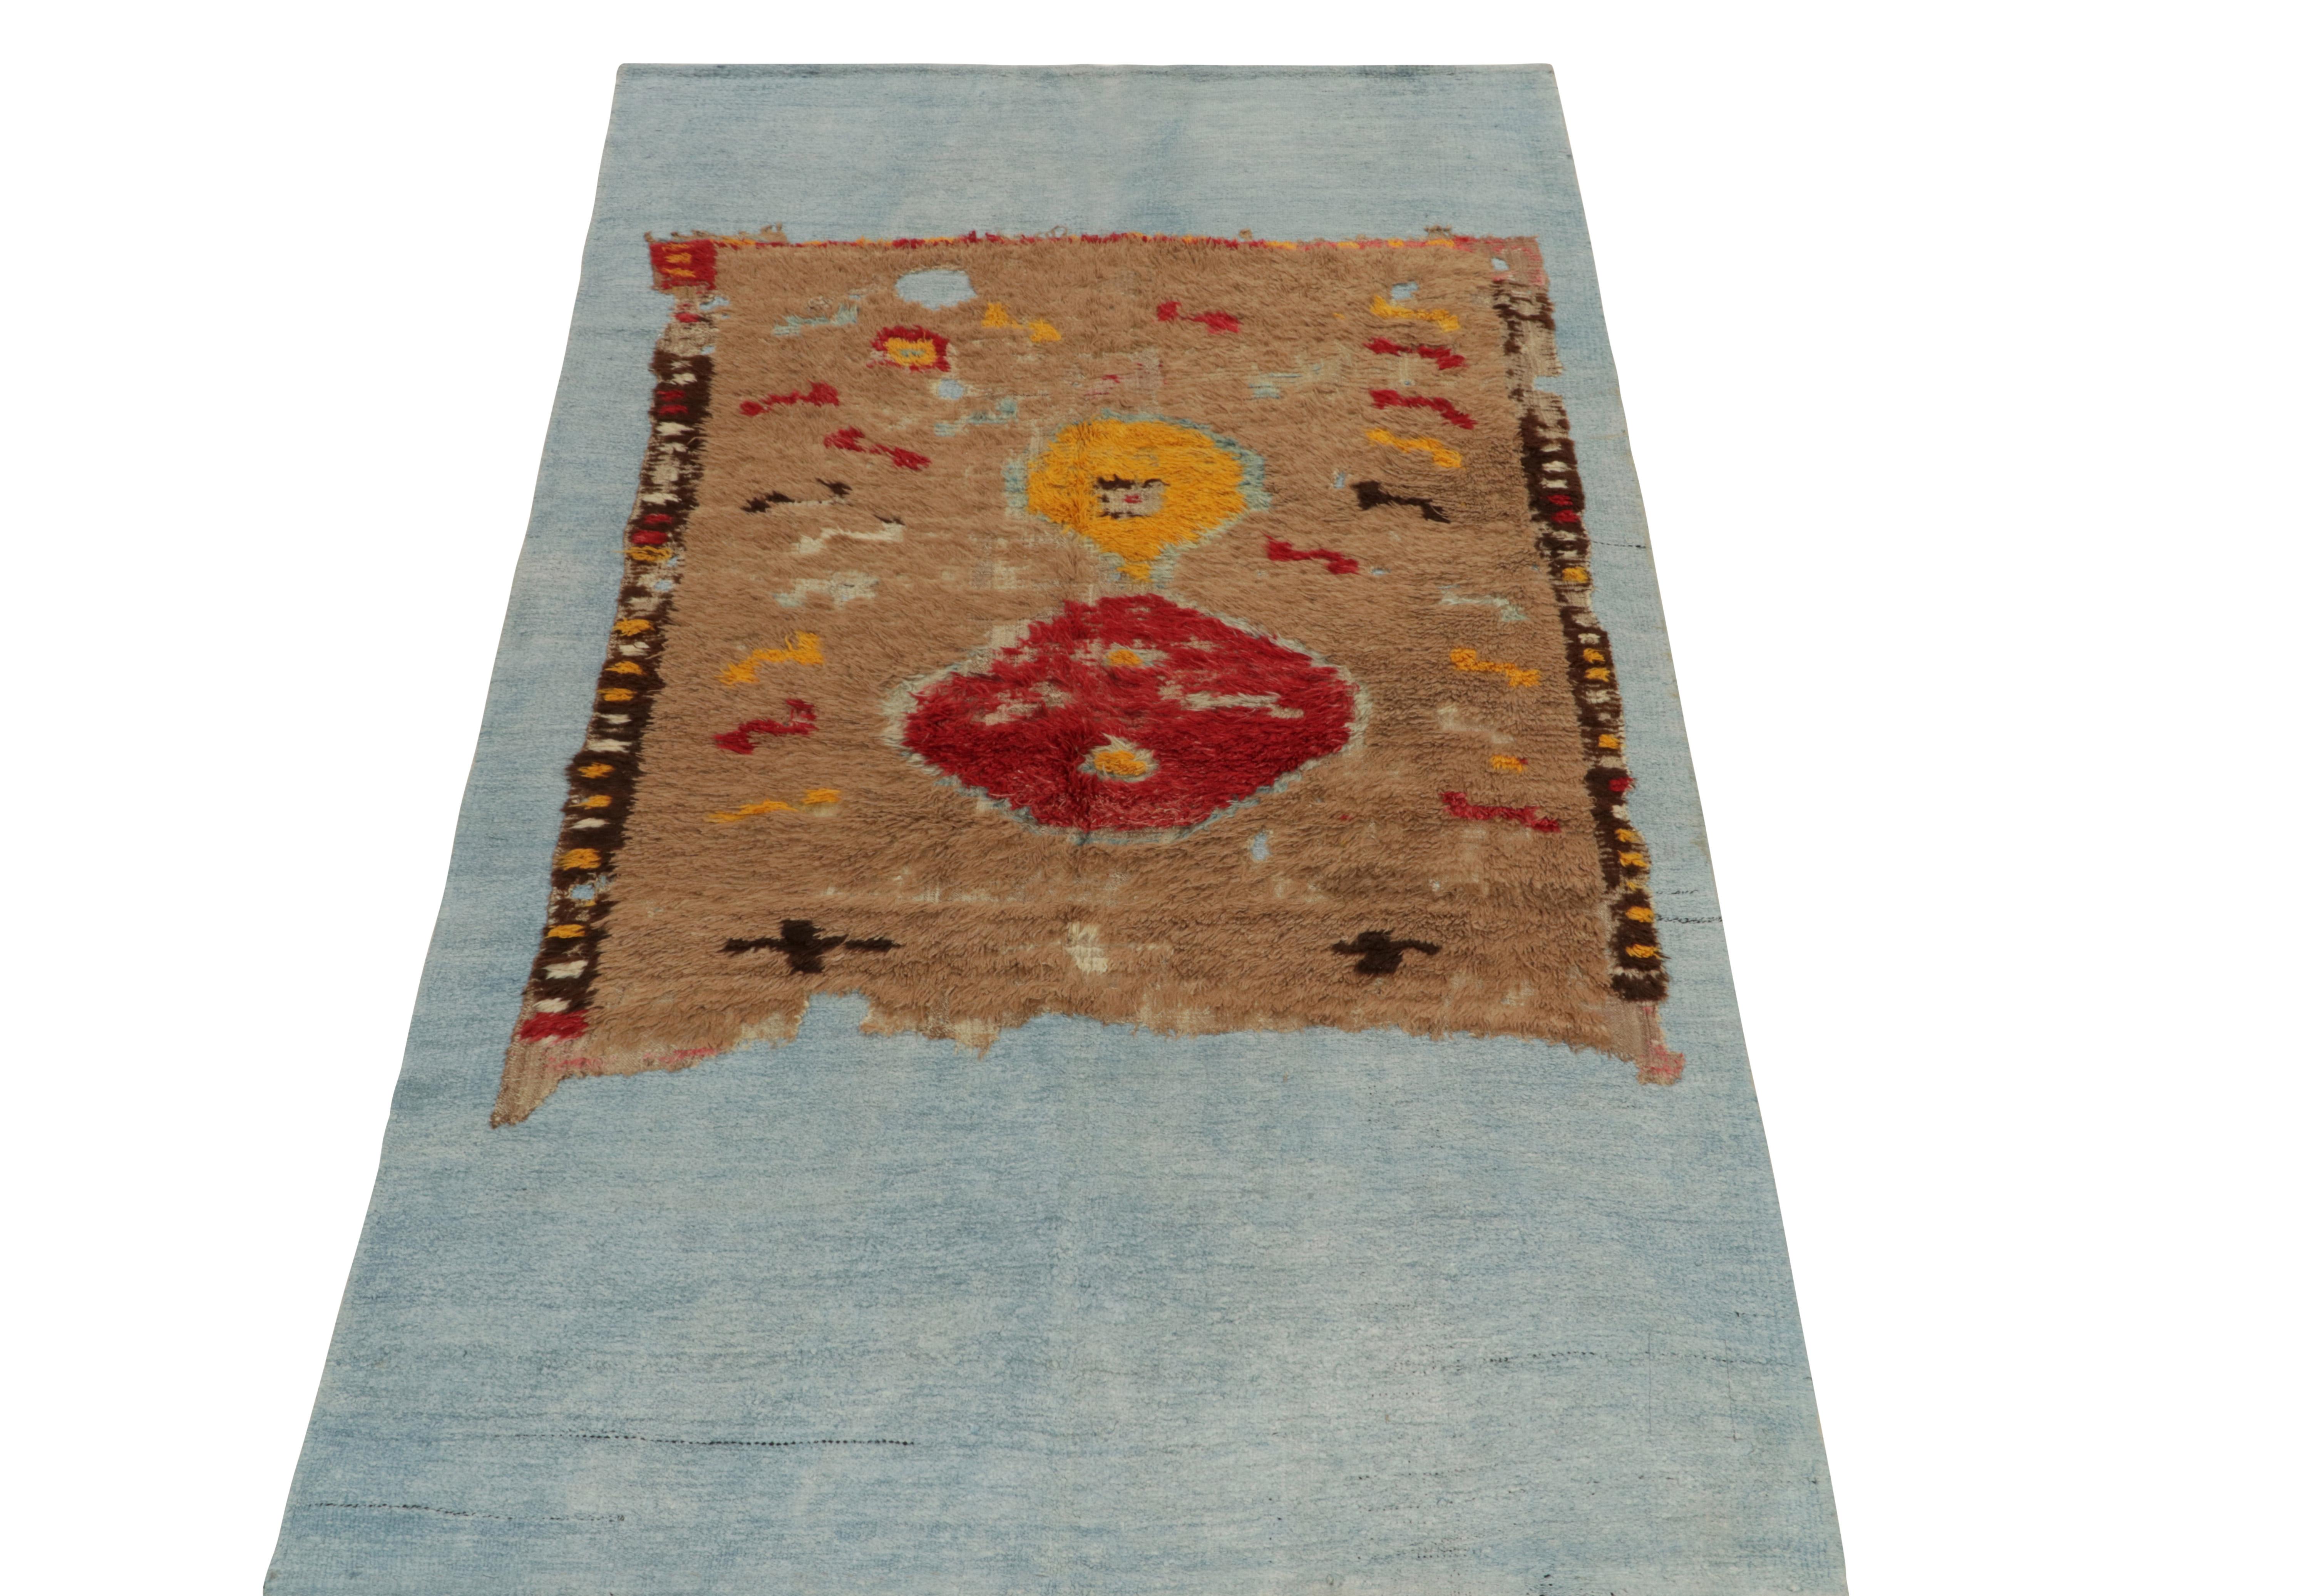 Hand-knotted in fine wool,a 5x10 fragment rug bearing distressed aesthetics resting calmly on a blue-gray flatweave. The fragment prevails in bright yellow, beige & red complementing a natural high low atop the flatweave—capable of adorning a